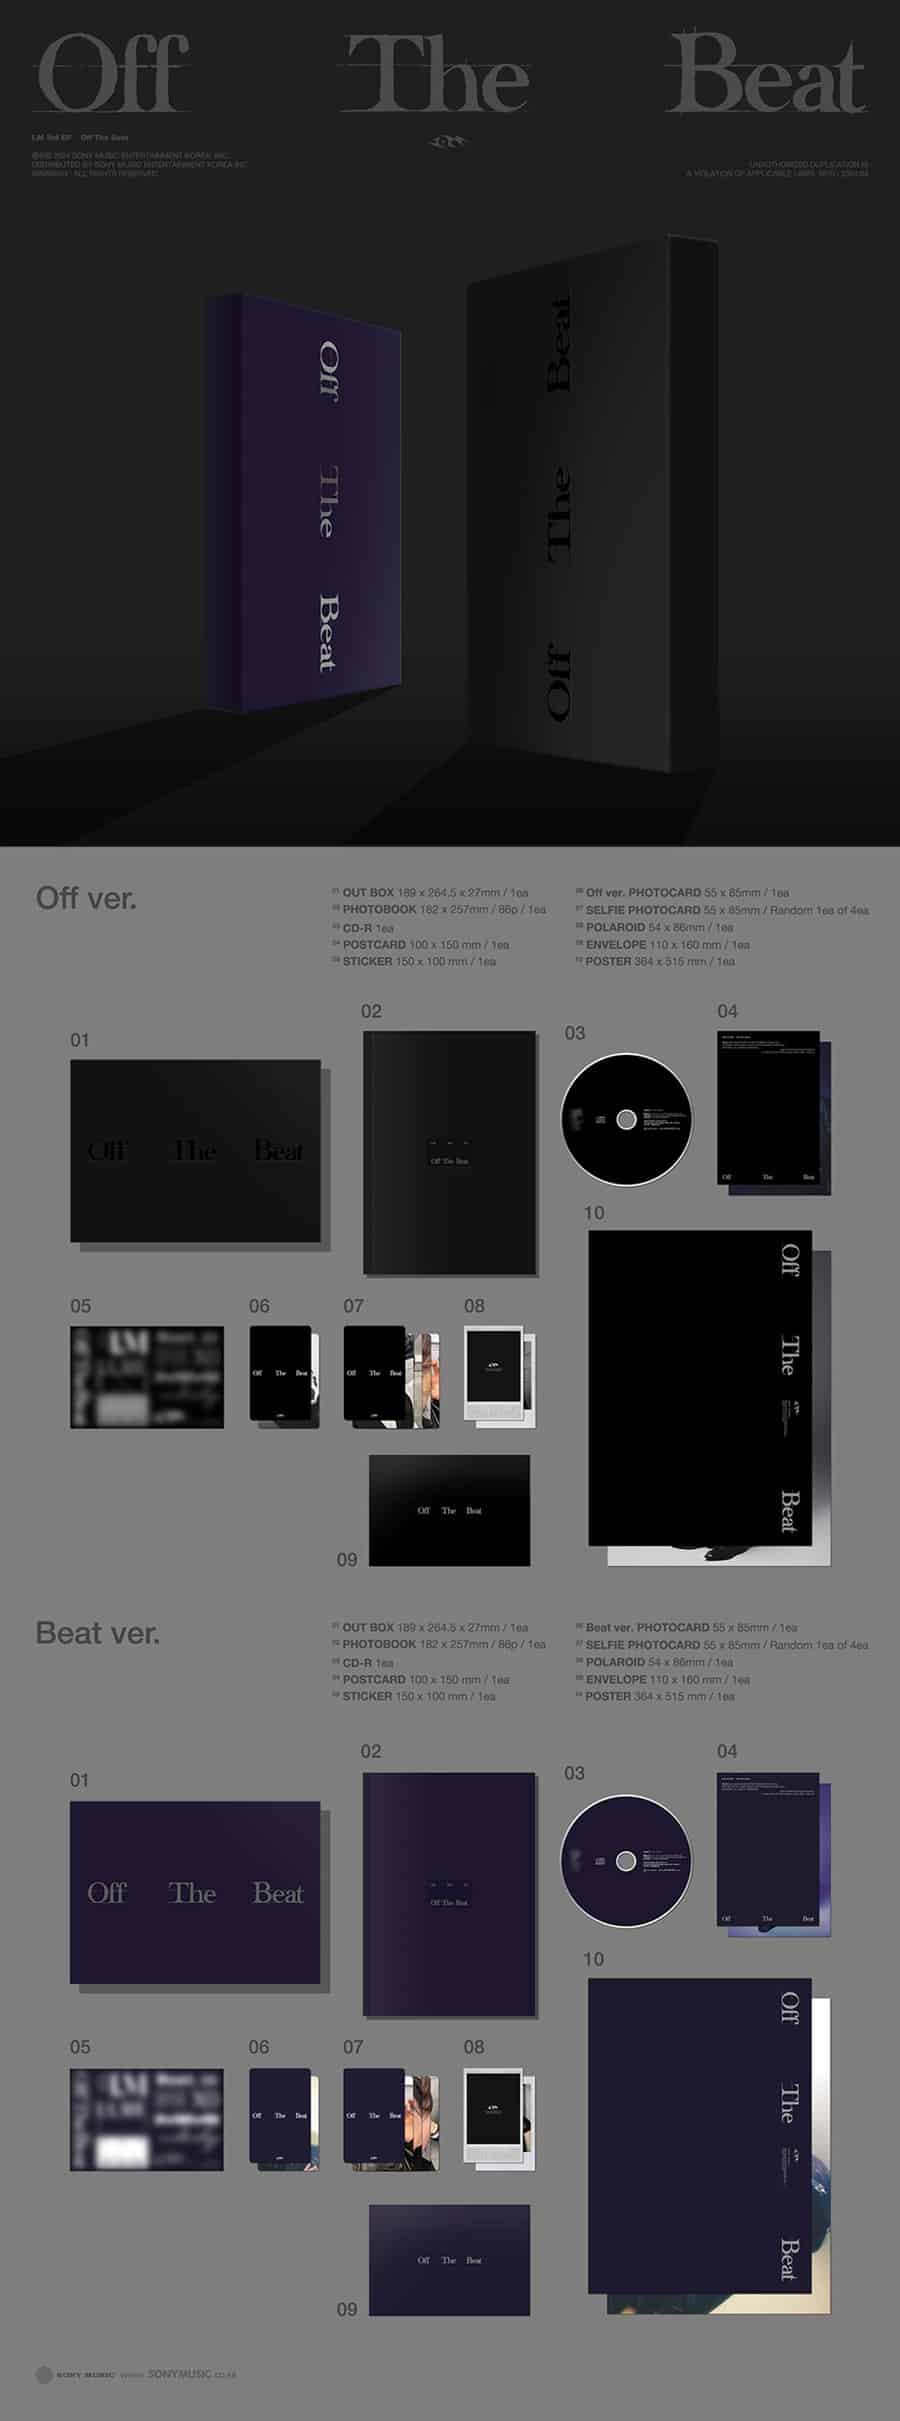 im-3rd-ep-off-the-beat-photobook-wholesales